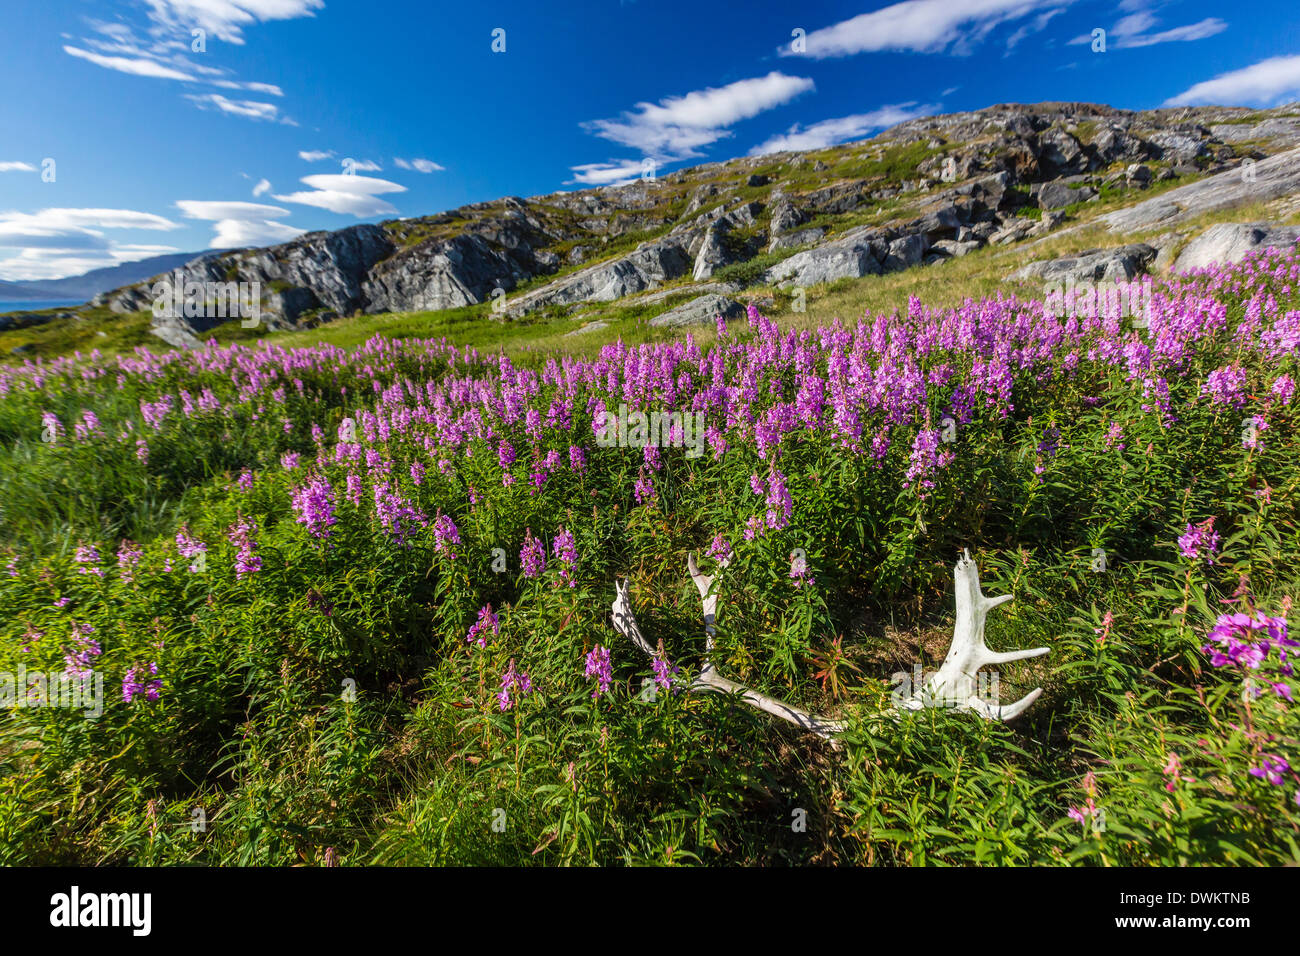 Dwarf fireweed (River Beauty willowherb) (Chamerion latifolium), with caribou antlers in Hebron, Labrador, Canada, North America Stock Photo